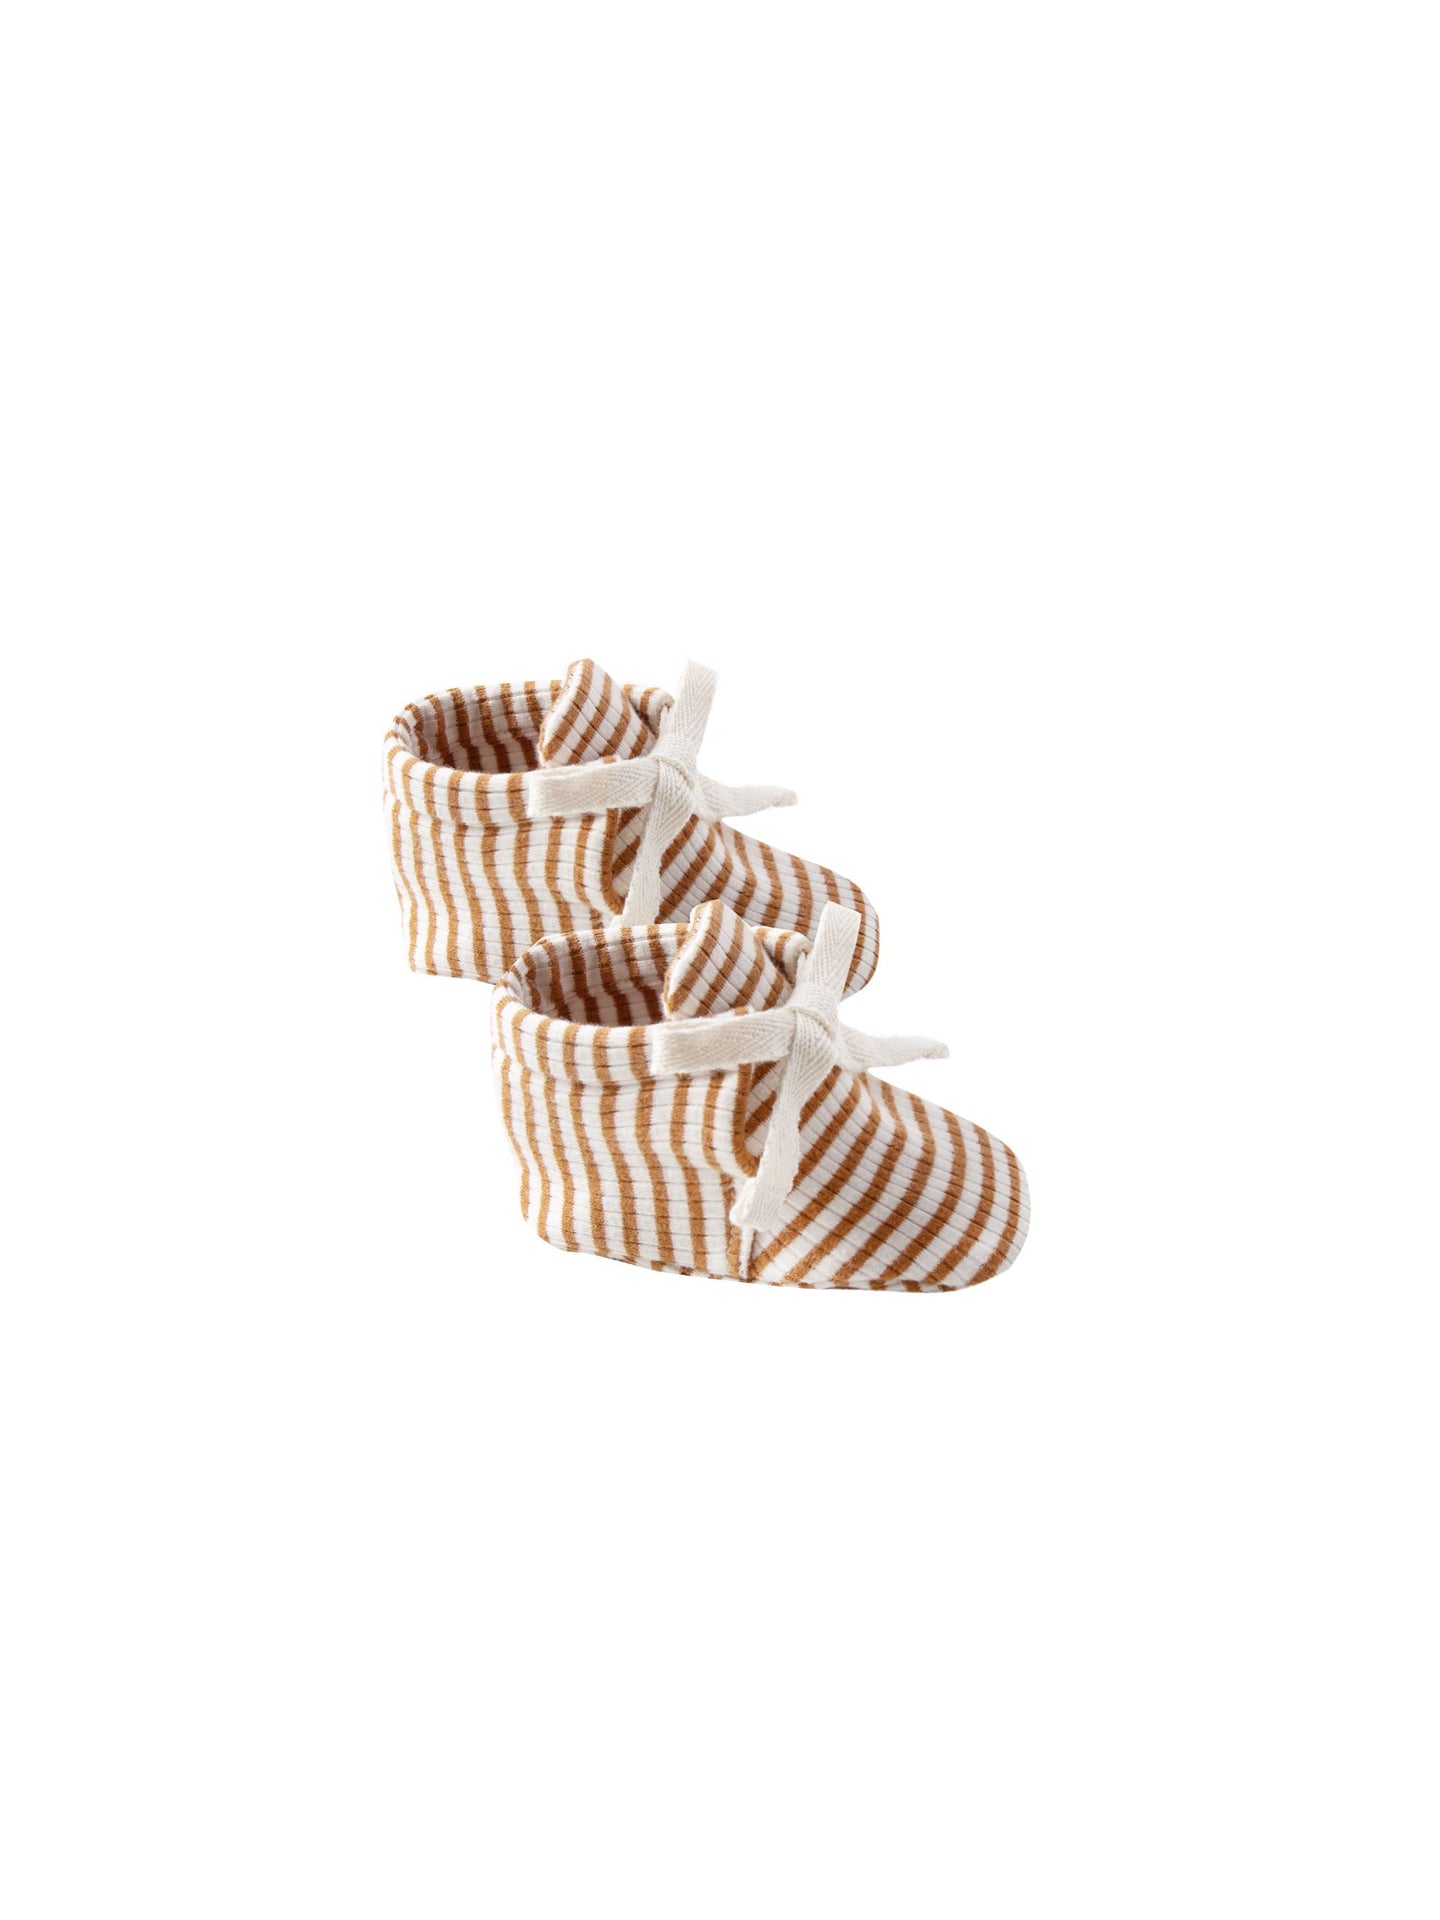 Quioncy Mae - Organic Ribbed Baby Booties - Walnut Stripe